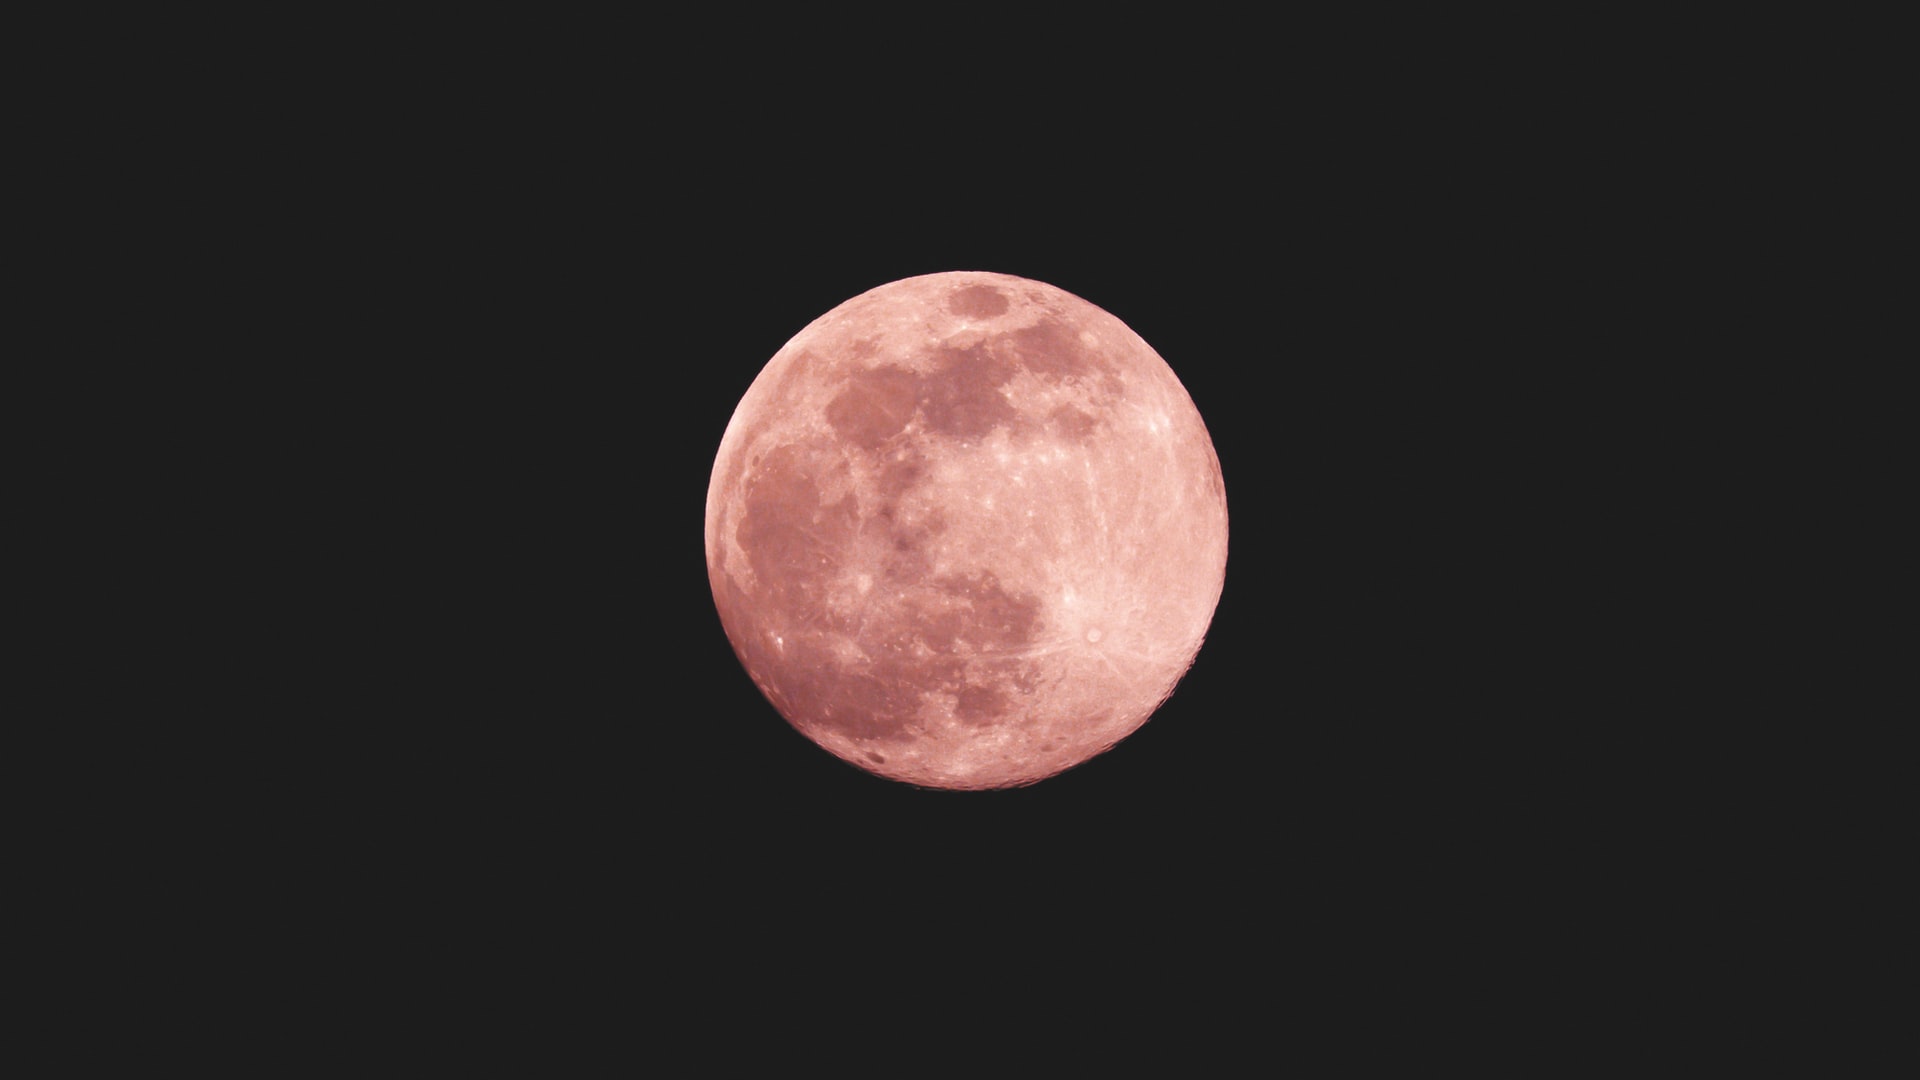 Yesterday S Pink Super Moon Tanja Pajevic